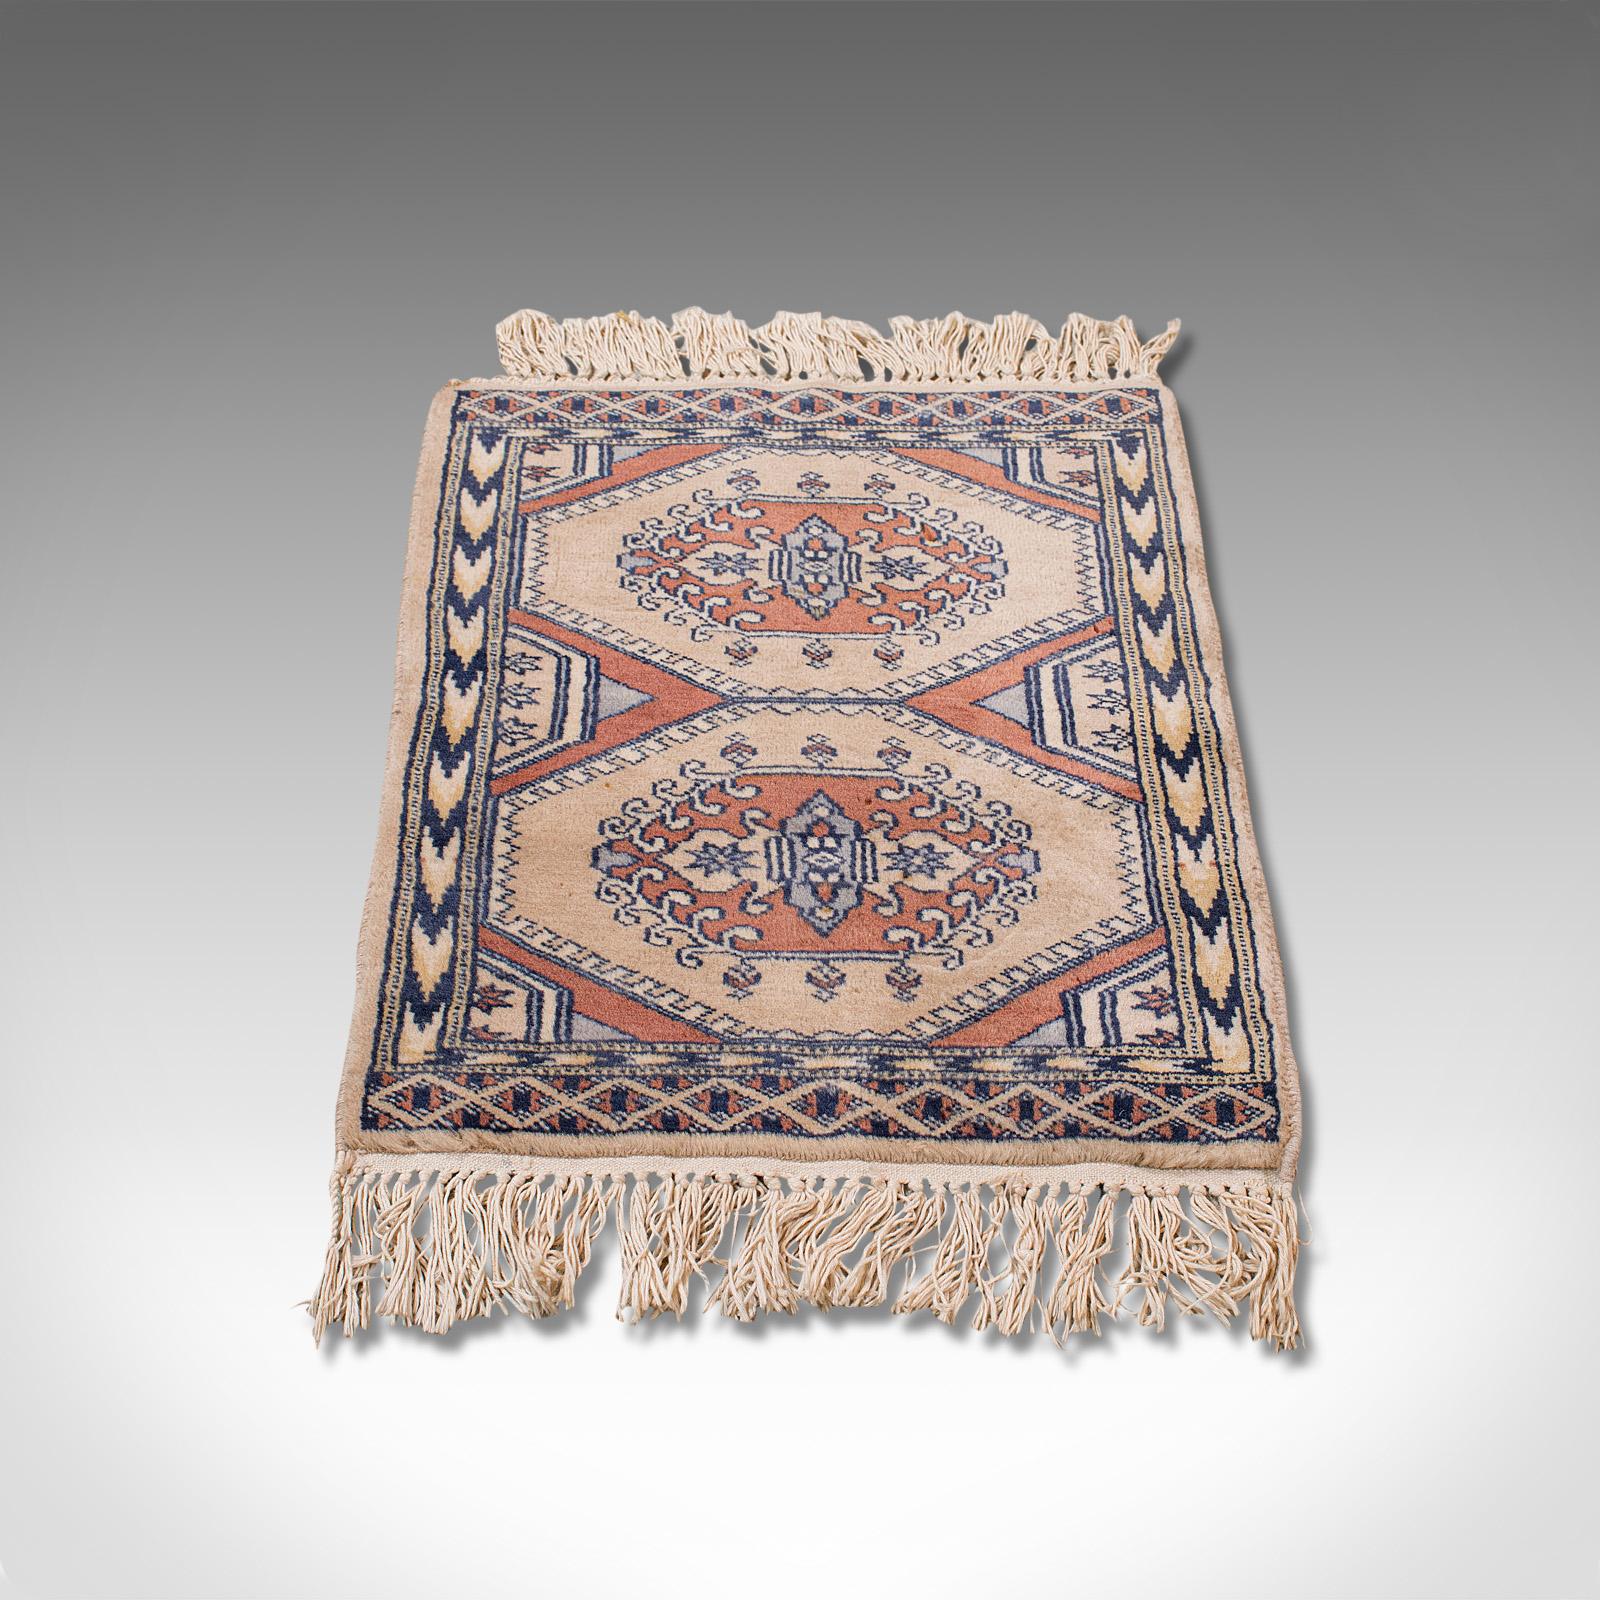 This is a small vintage Hamadan rug. A Persian, woolen hall or prayer mat, dating to the mid-20th century, circa 1950.

Pleasingly geometric small rug
Displays a desirable aged patina and in overall clean order
Signs of minimal wear under close